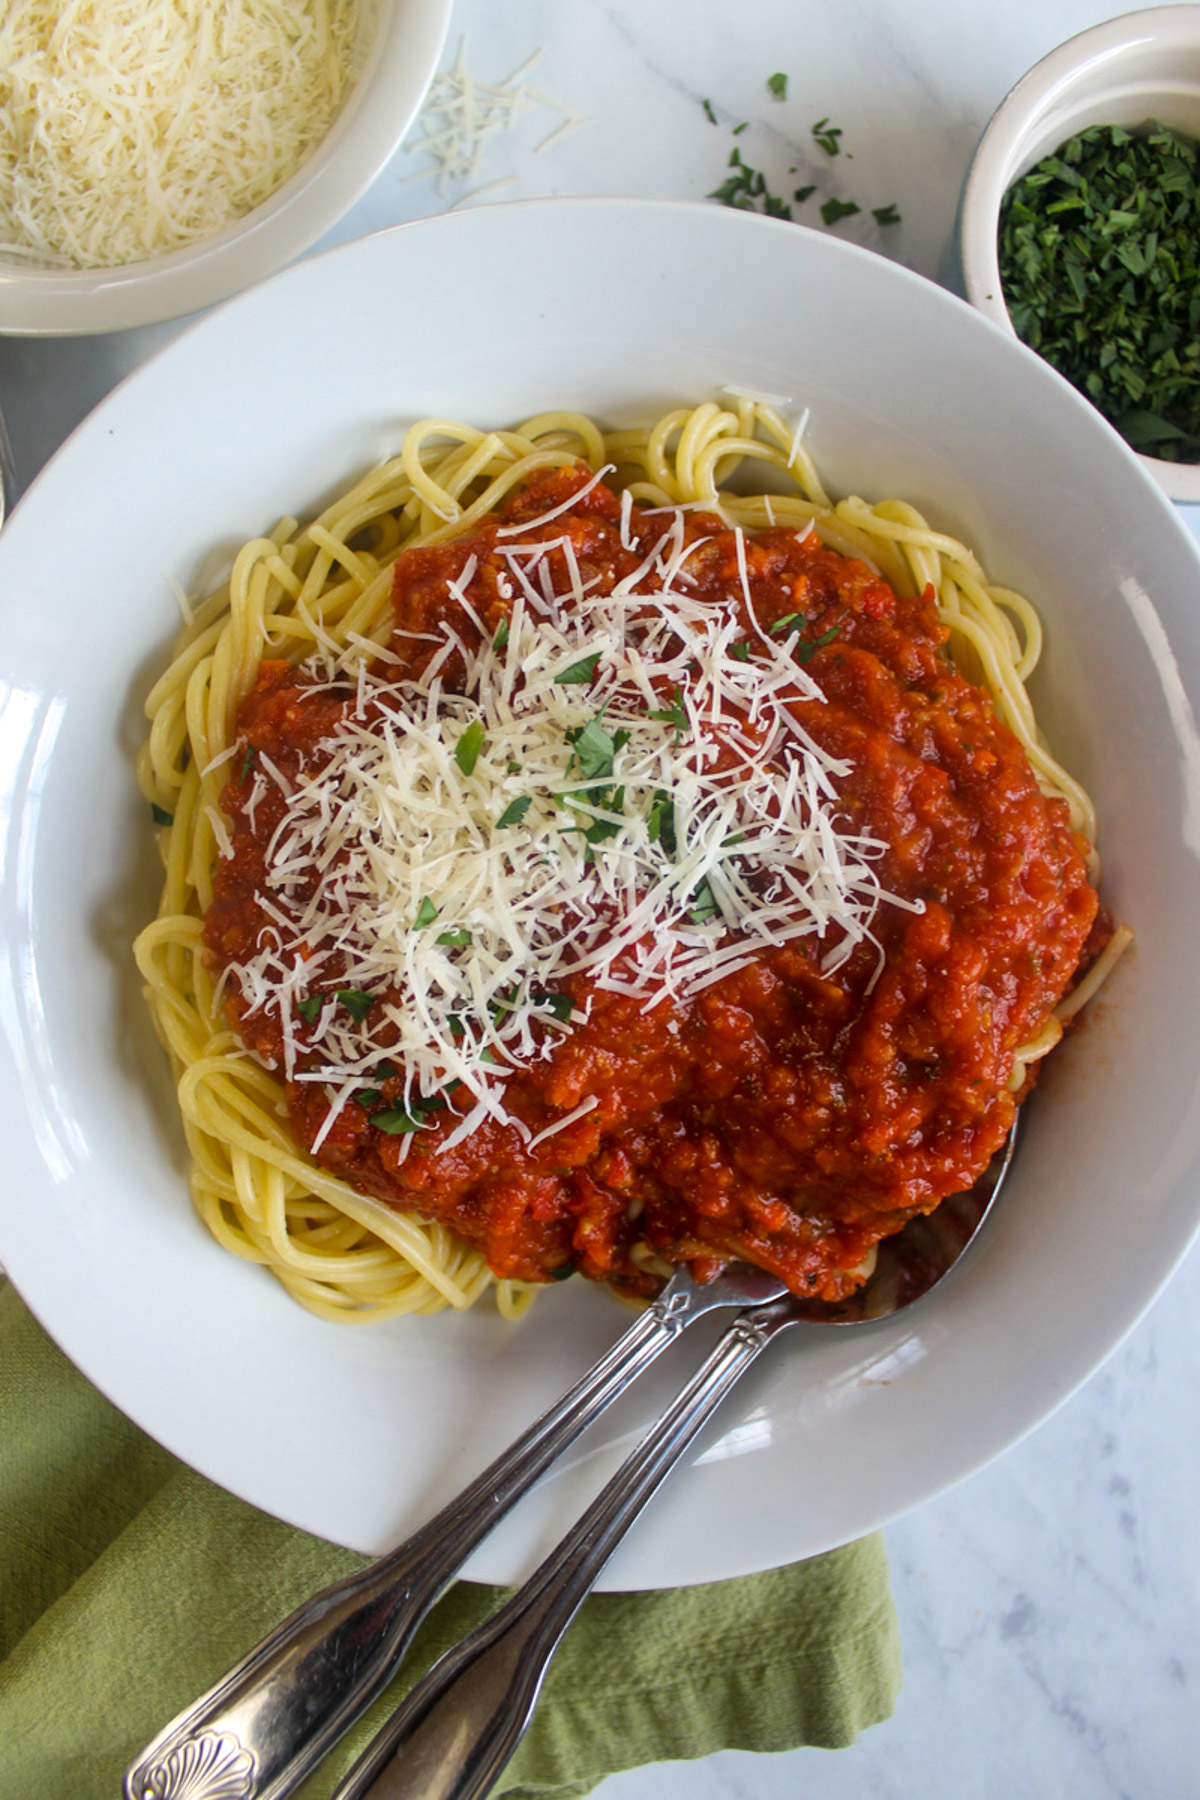 Italian Sausage Bolognese Sauce with Spaghetti pasta and Parmesan cheese.